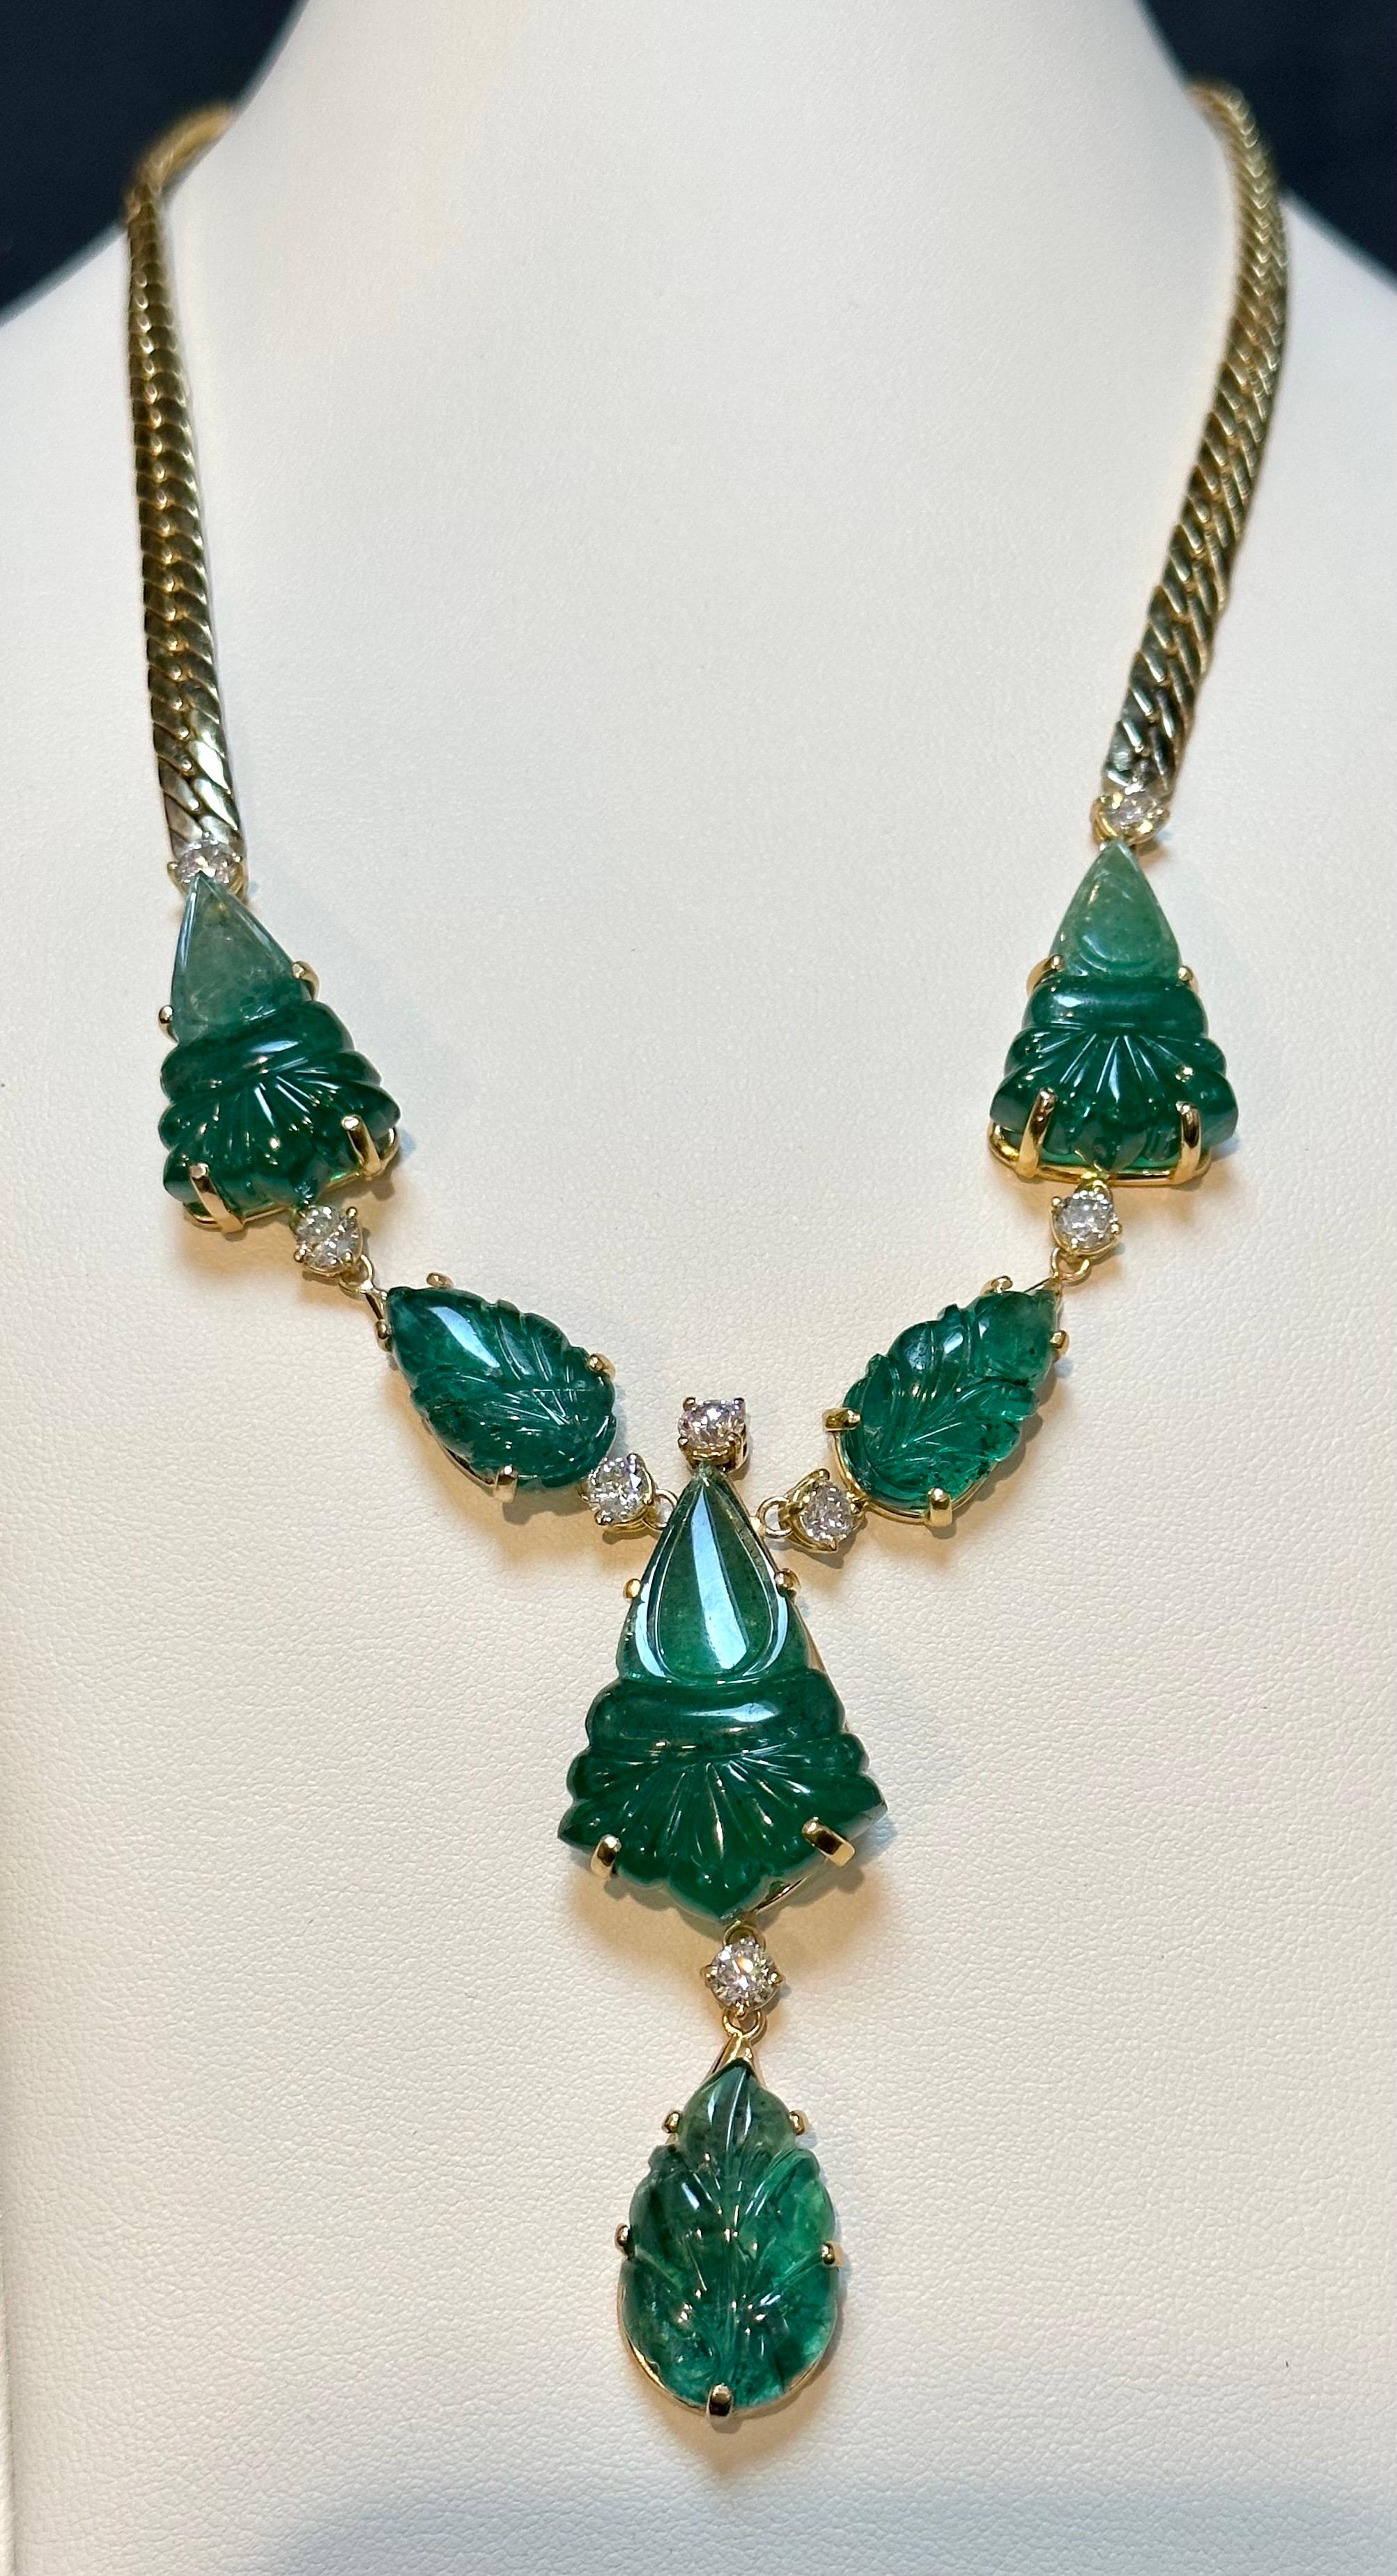 115 Ct Natural Carved Drop Emerald & 4 Ct Diamond  Necklace 18 Kt Gold Necklace For Sale 1